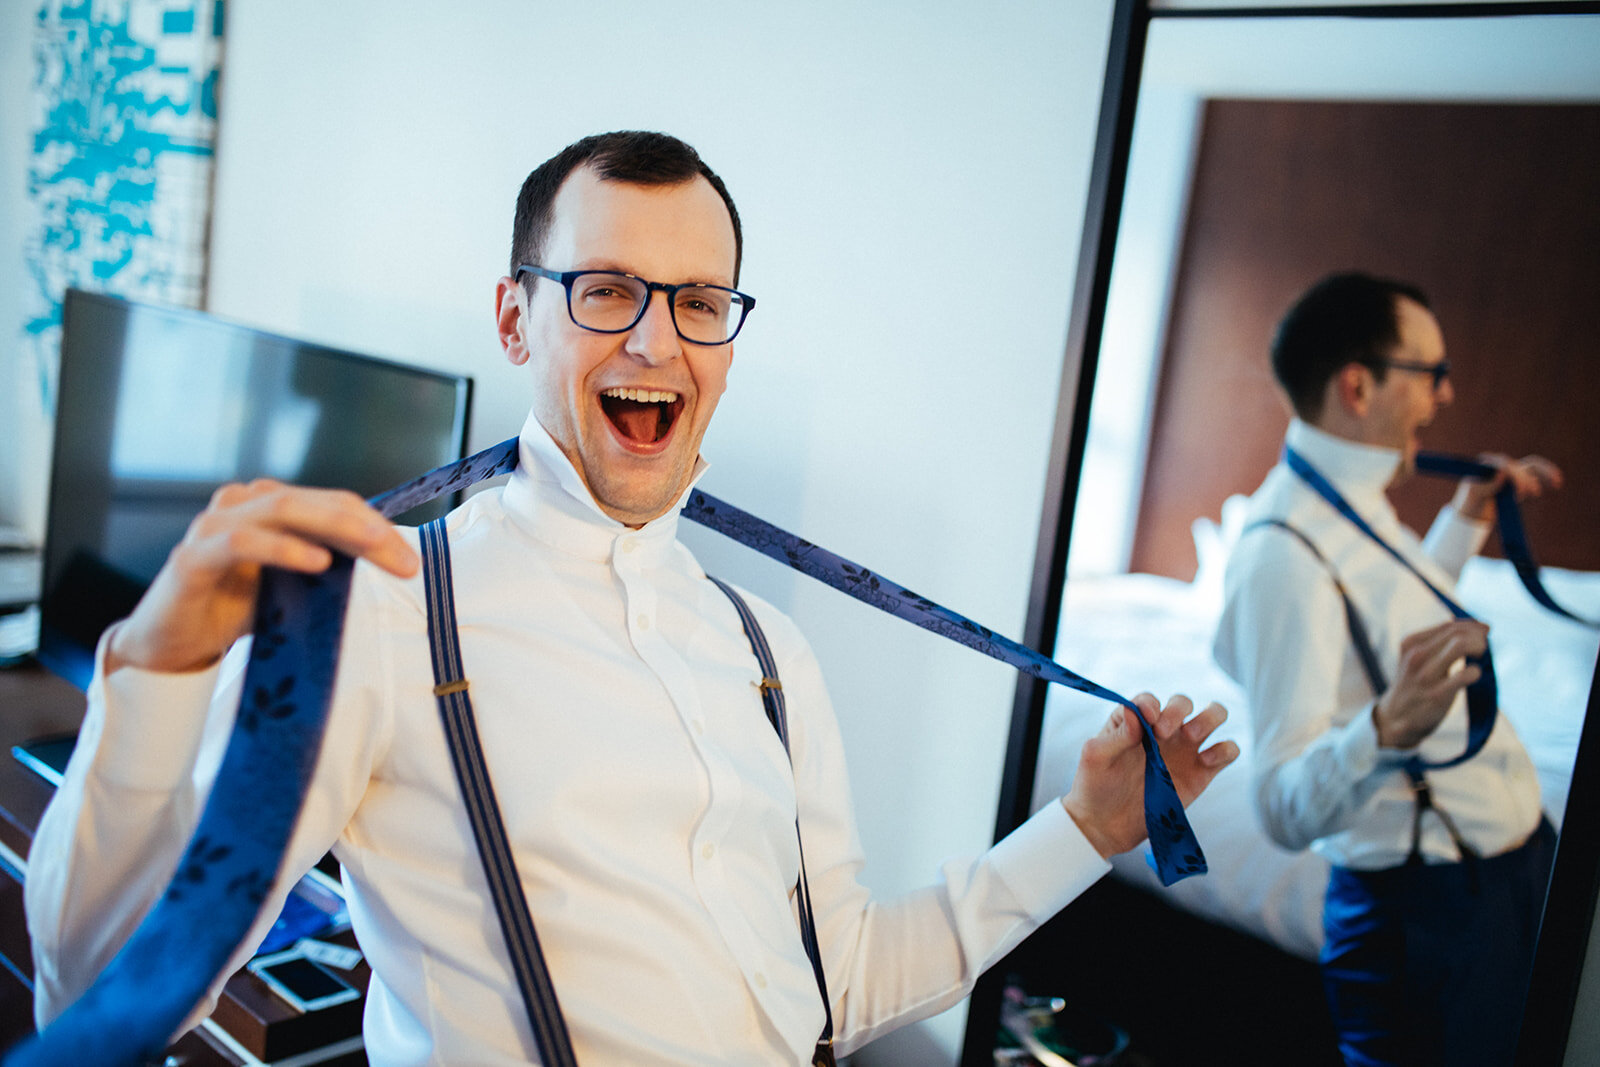 Groom being silly with his tie in Brooklyn New York Shawnee Custalow queer wedding photographer